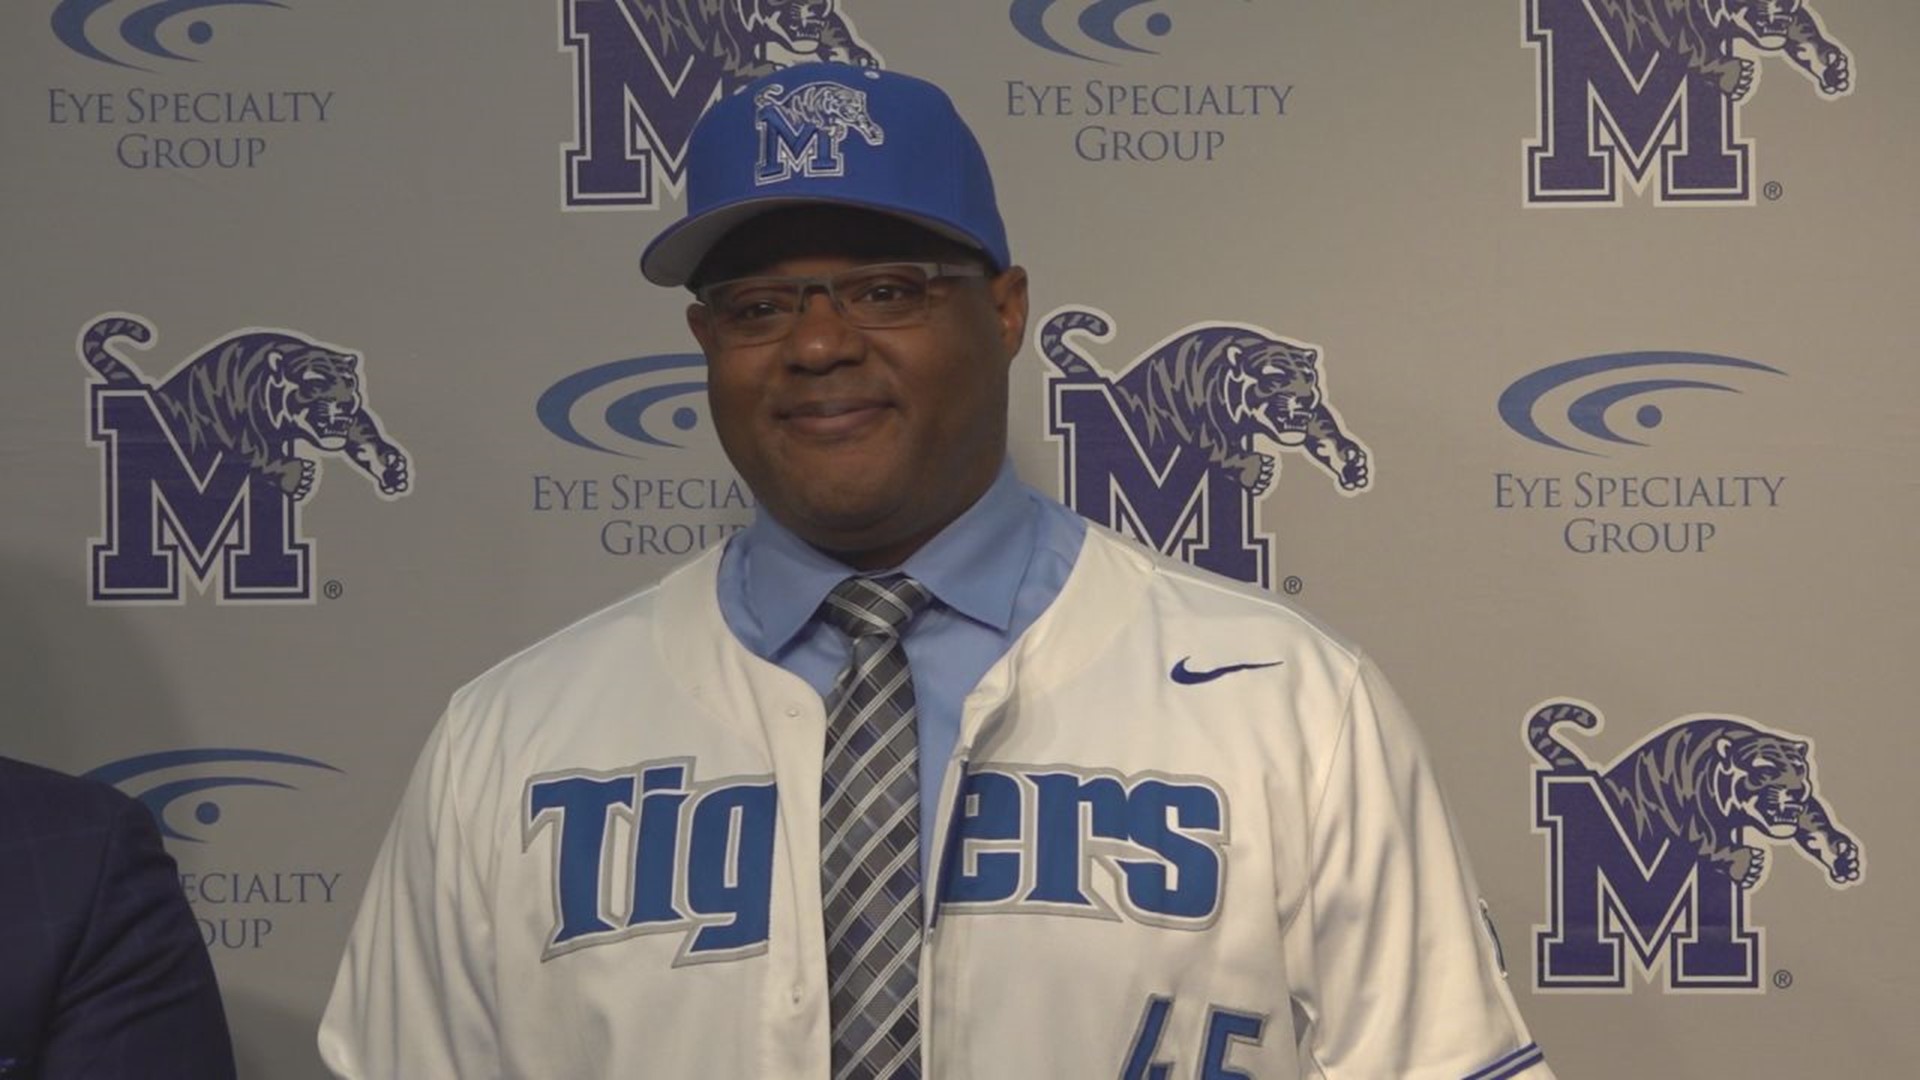 Jackson was formally introduced as the first black head coach in Memphis baseball history